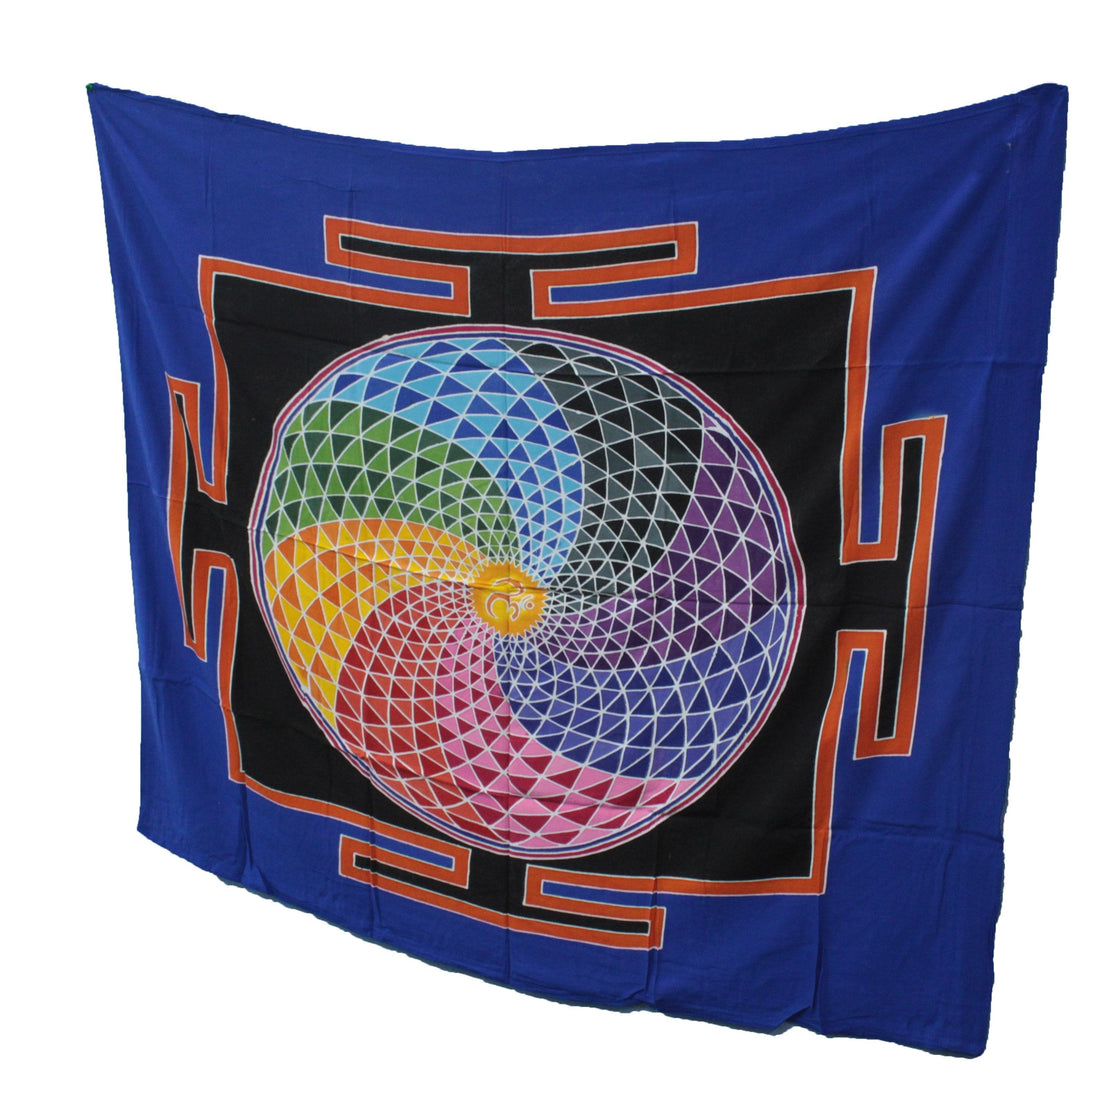 Wall Hangings - Seven Flags Symbols - best price from Maltashopper.com BWAX-21